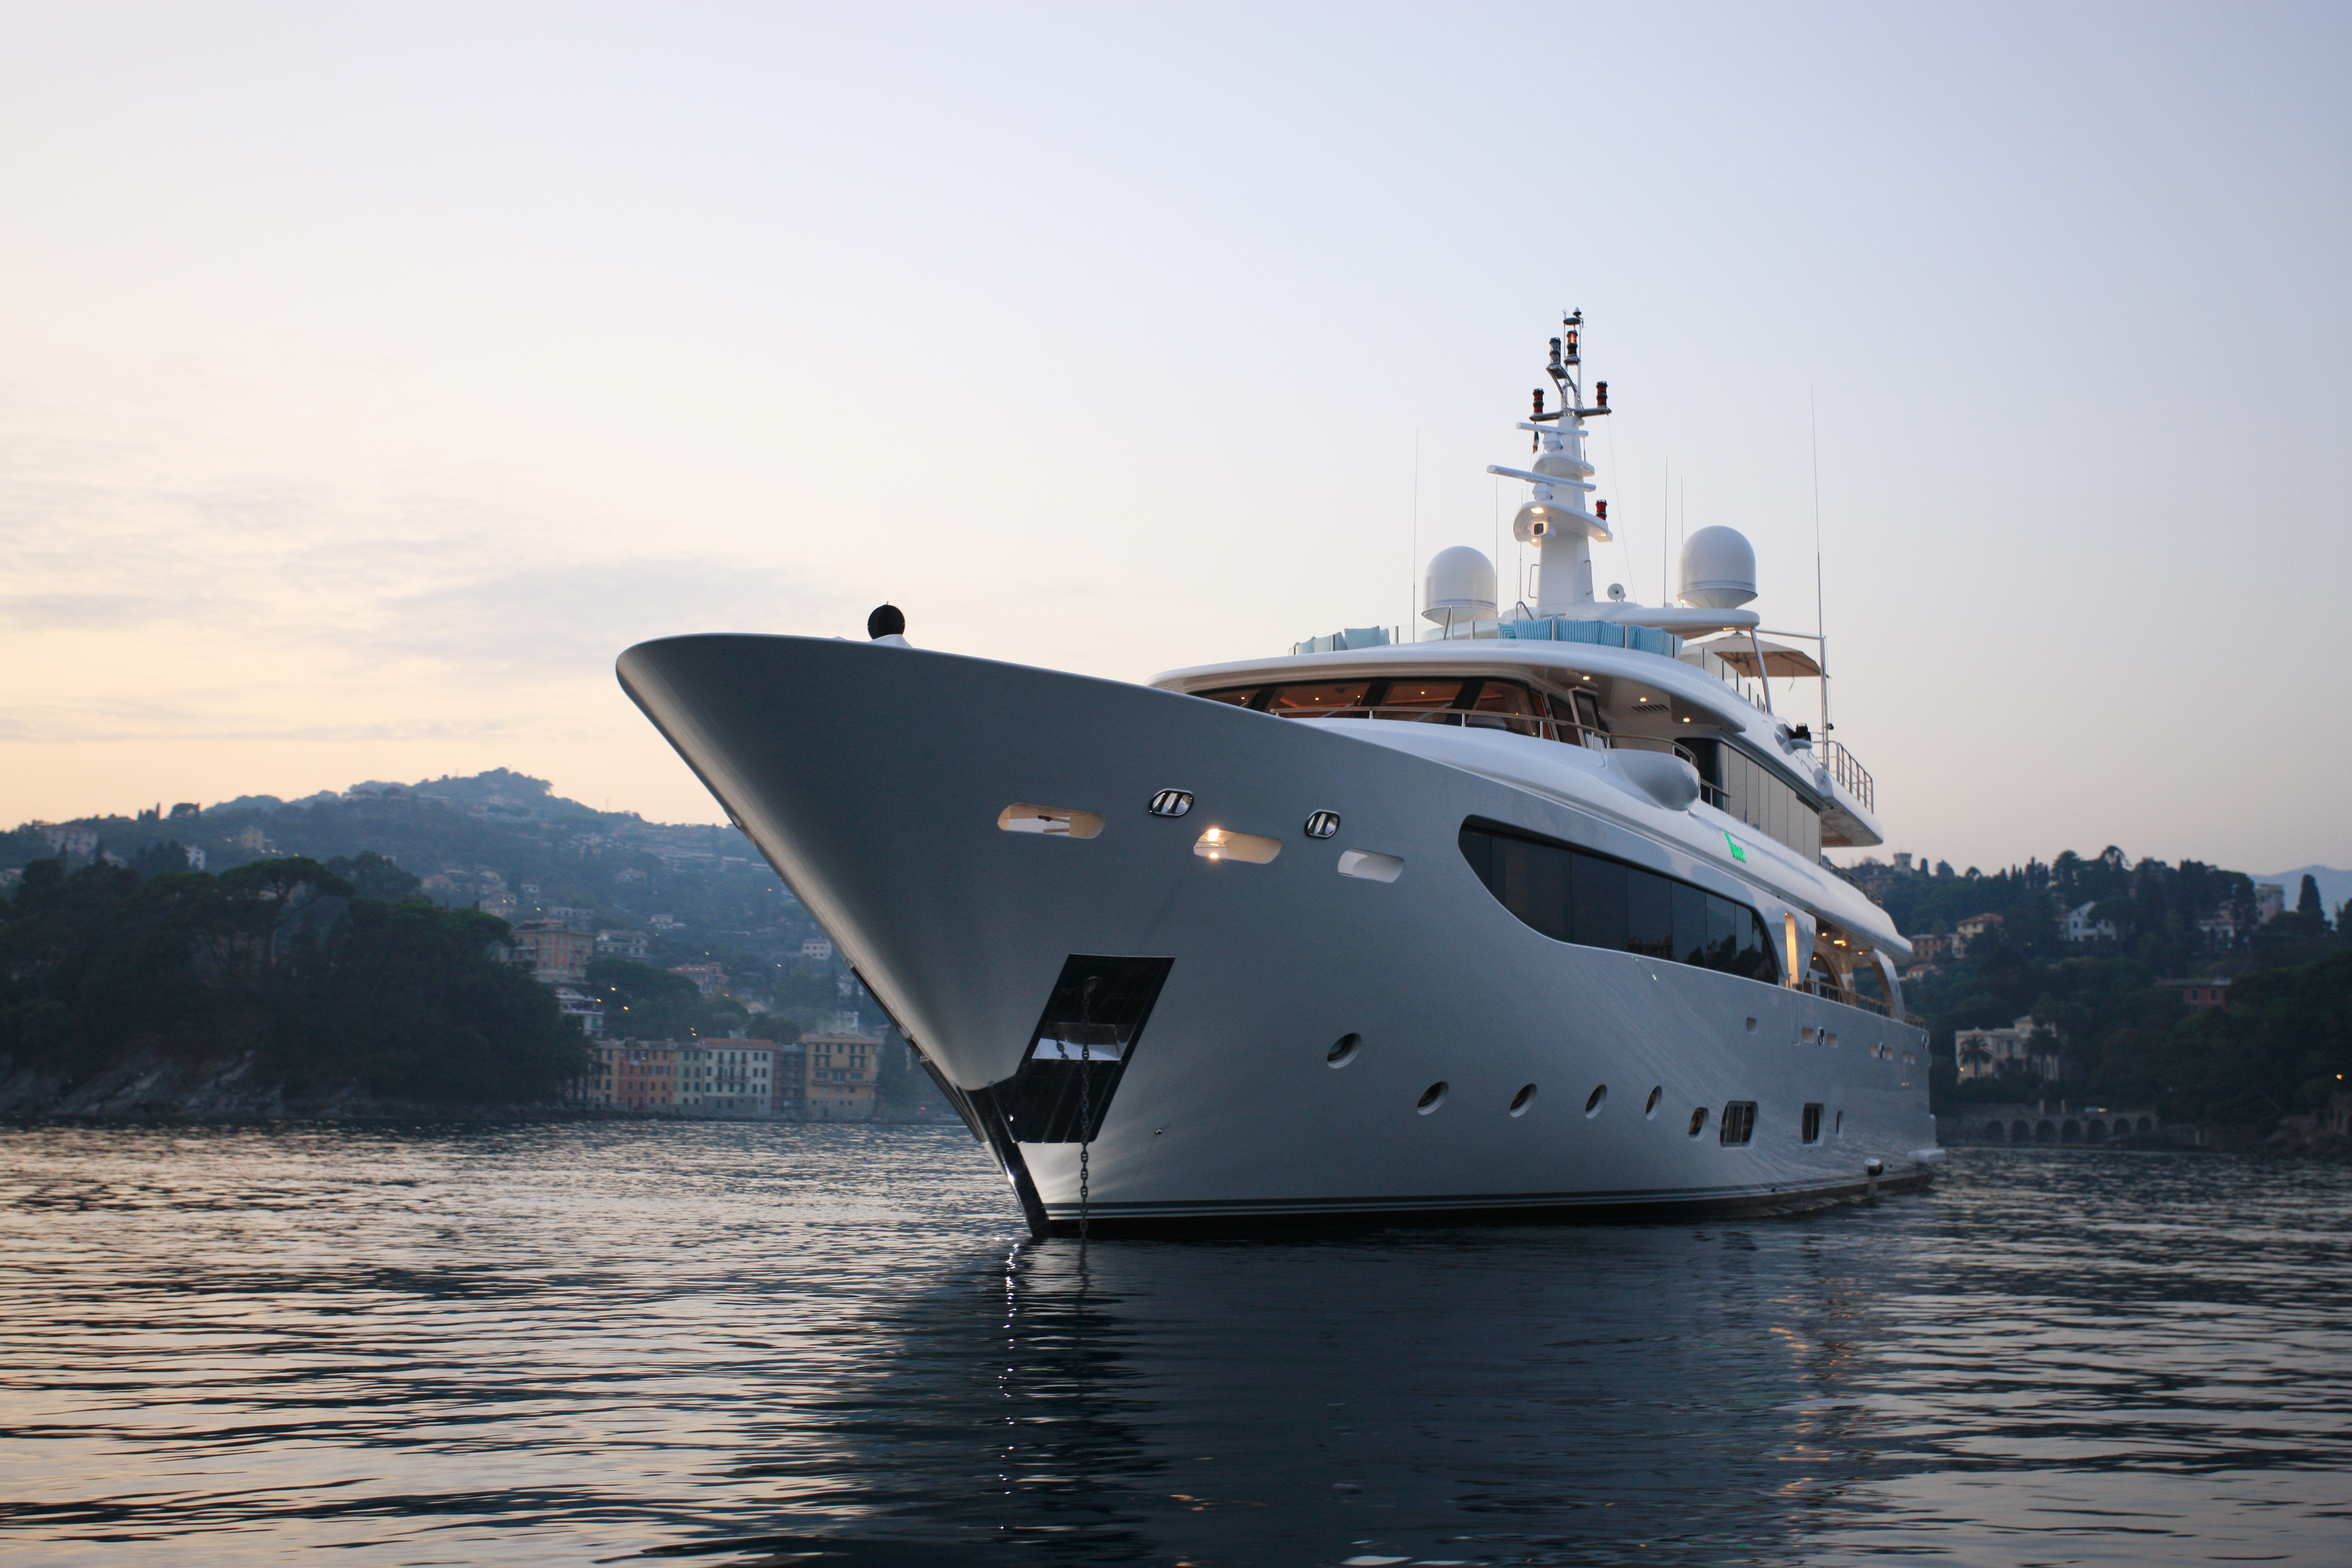 Bow View Of The Yacht